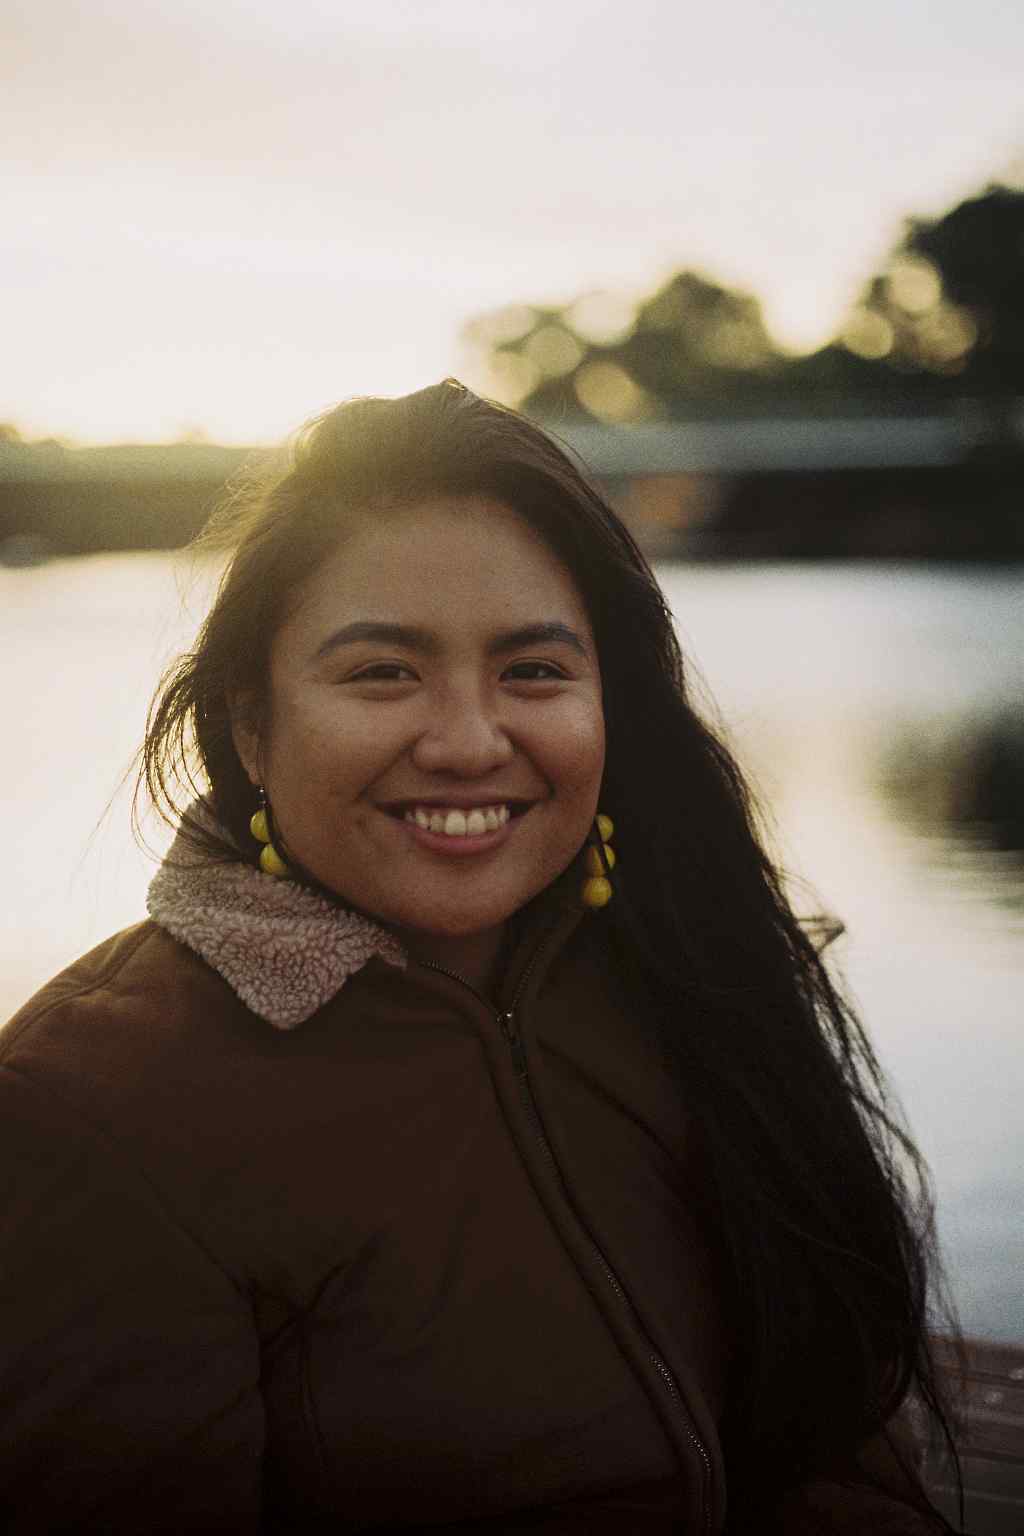 Smiling artist Alyssa Powell-Ascura with a sunset background. Photograph taken by Louis Bullock on film.